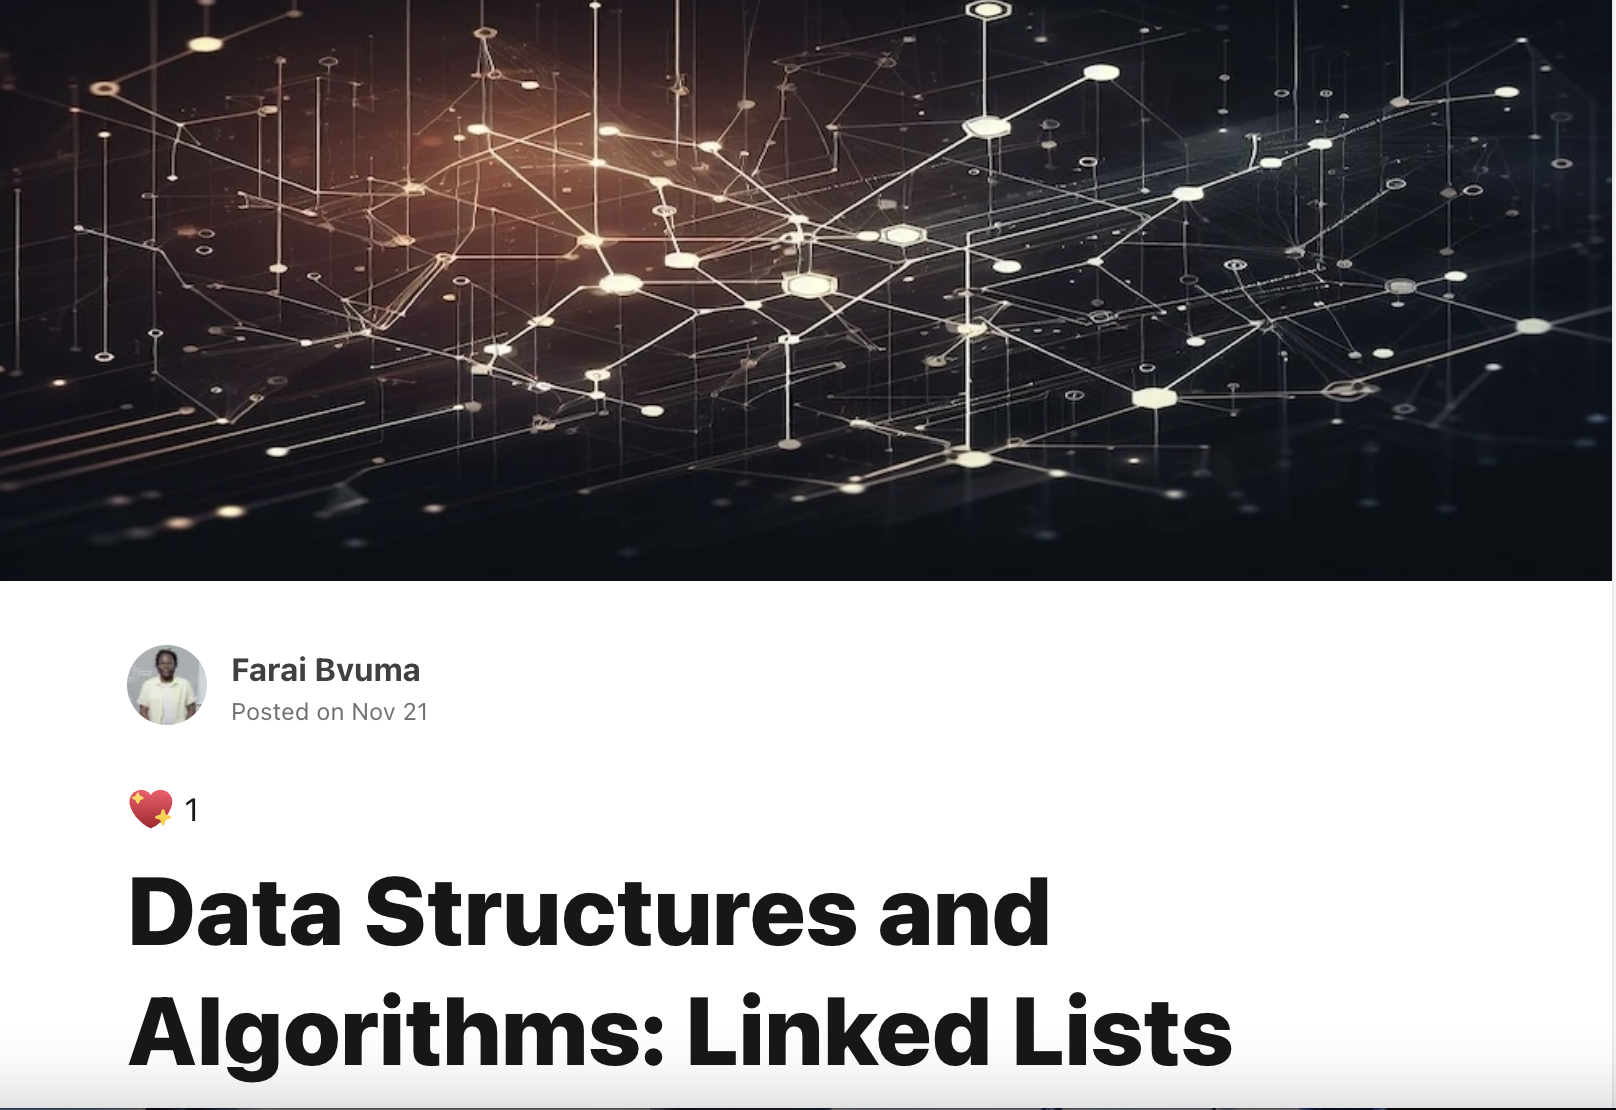 Data Structures and Algorithms: Linked Lists